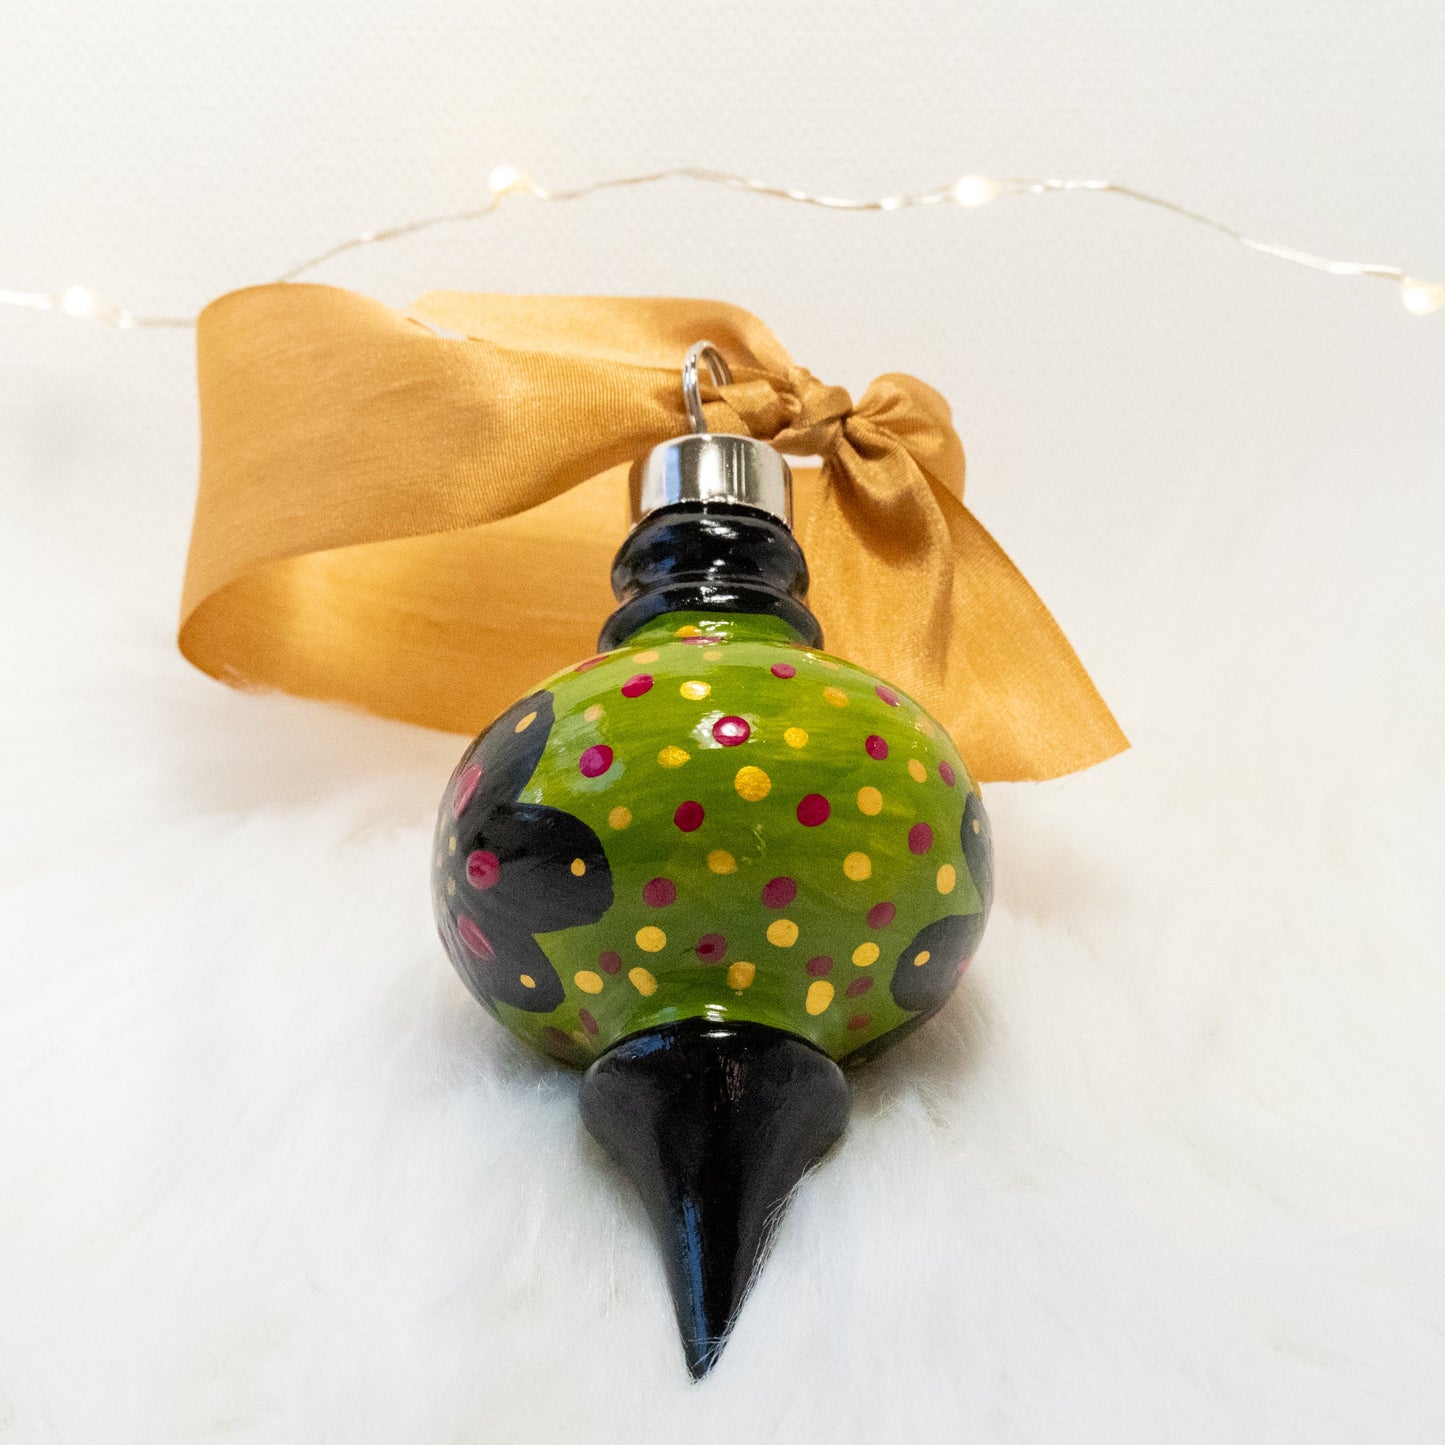 The Sam Hand Painted Ornament features a green gold and black base coat, black flowers with rose violet and gold accents and rose violet and gold polka dots. Painted using fluid acrylic and acryla gouache paints. Displayed on white faux fur with fairy lights in the background.